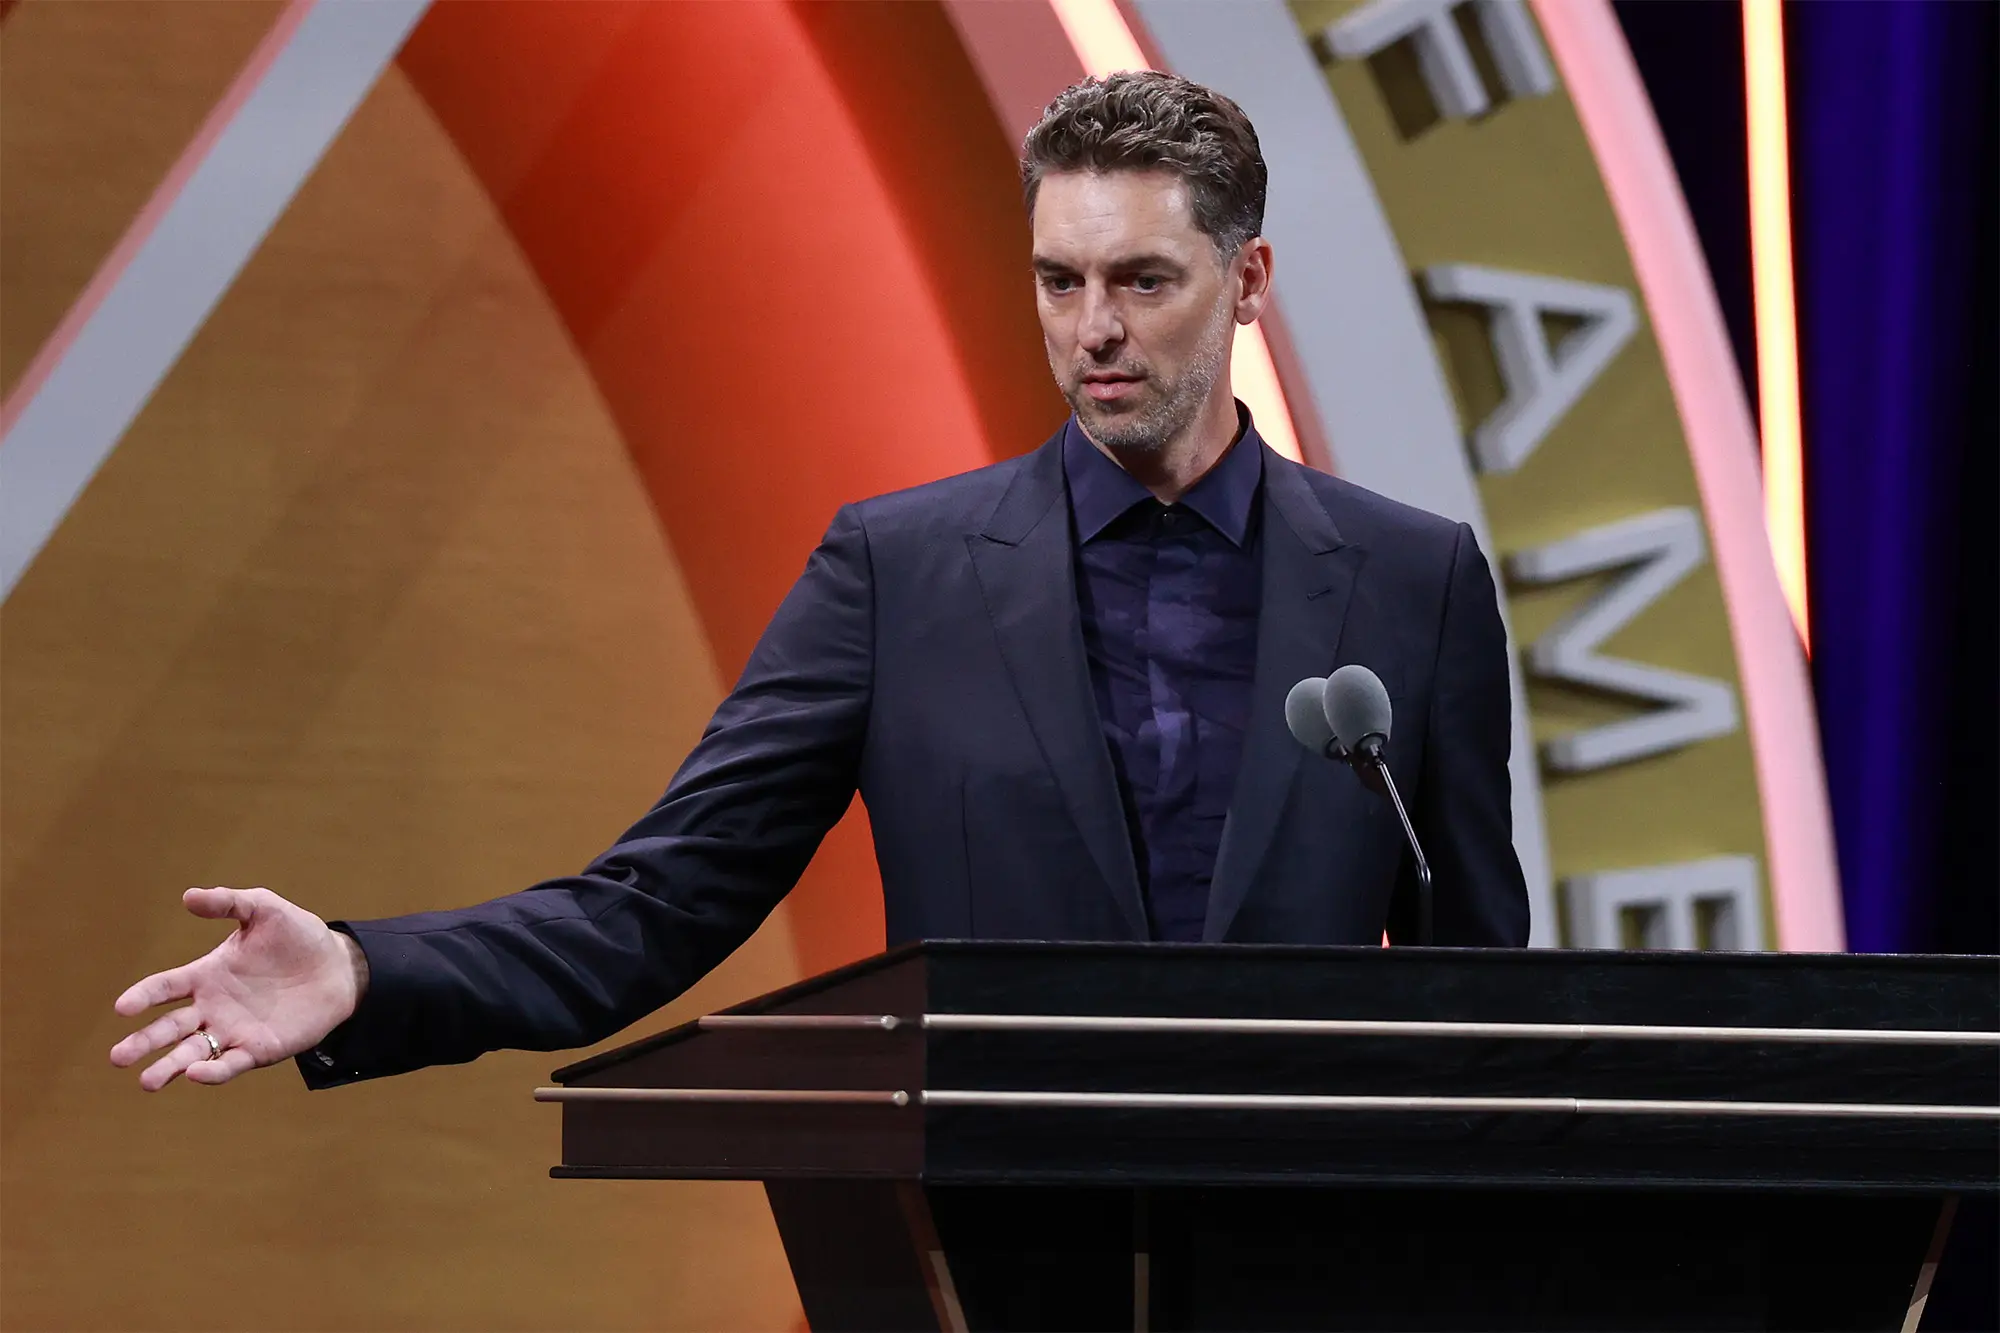 Pau Gasol was inducted into the Naismith Memorial Basketball Hall of Fame alongside the 2023 class on Saturday, August 12. Photo Credit: Mike Lawrie/Getty Images.